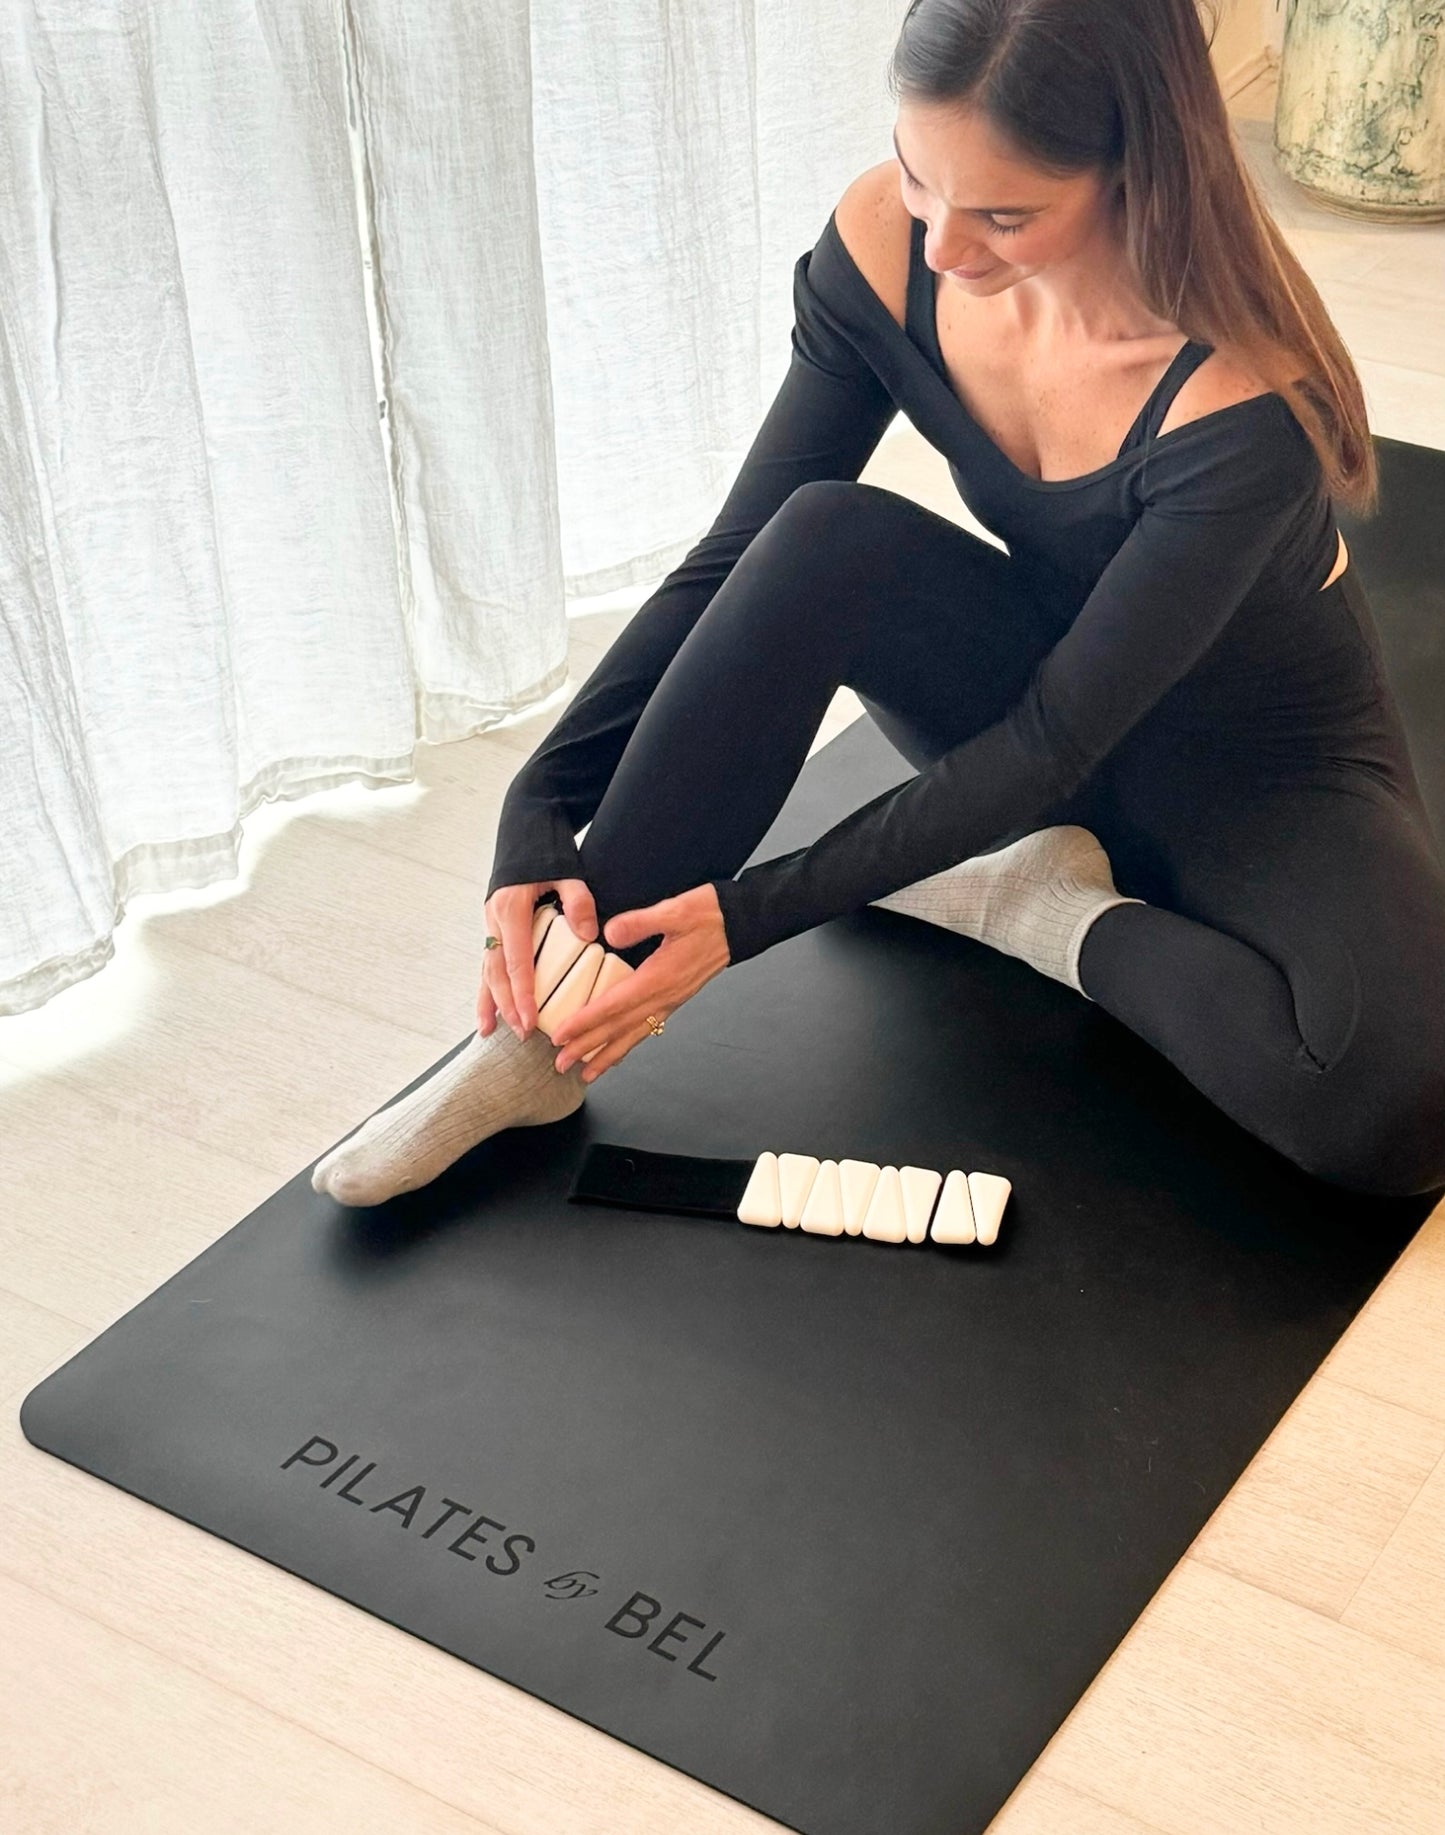 Pilates by bel white leg weights in pilates session